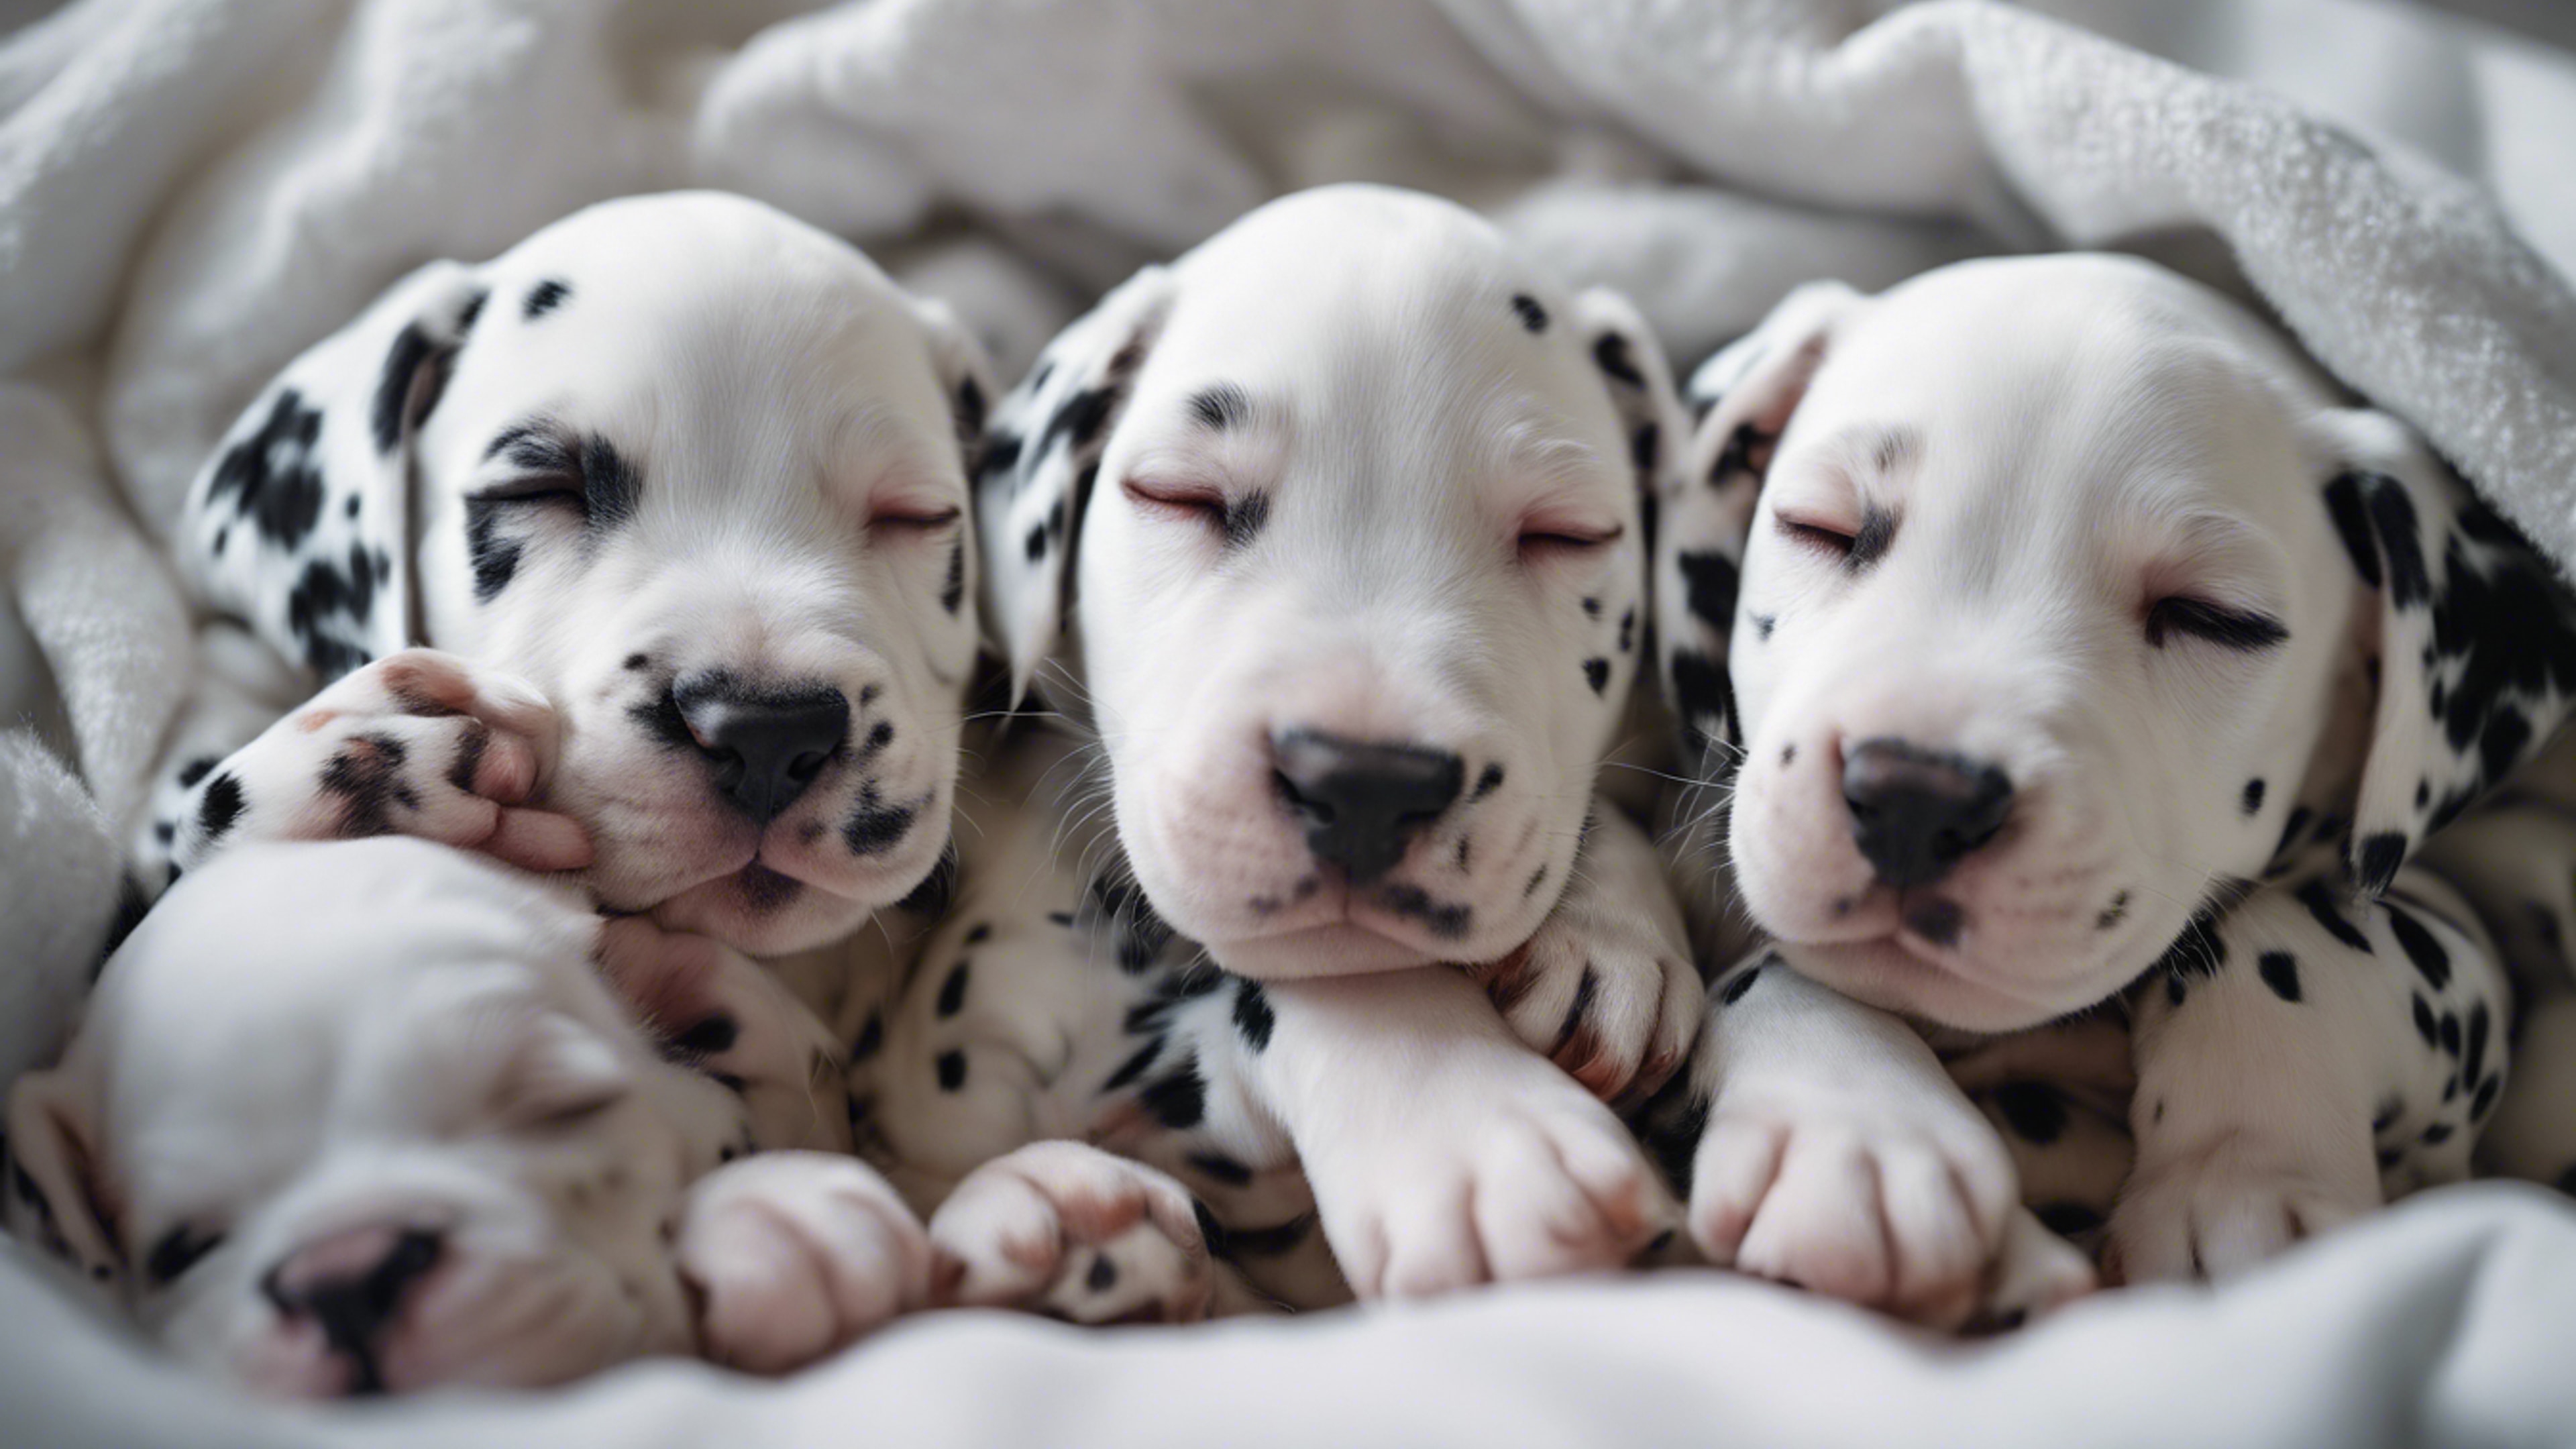 A cluster of sleeping Dalmatian puppies under a cozy white blanket in a nursery room. Wallpaper[4a5dc312c1f344509ca9]